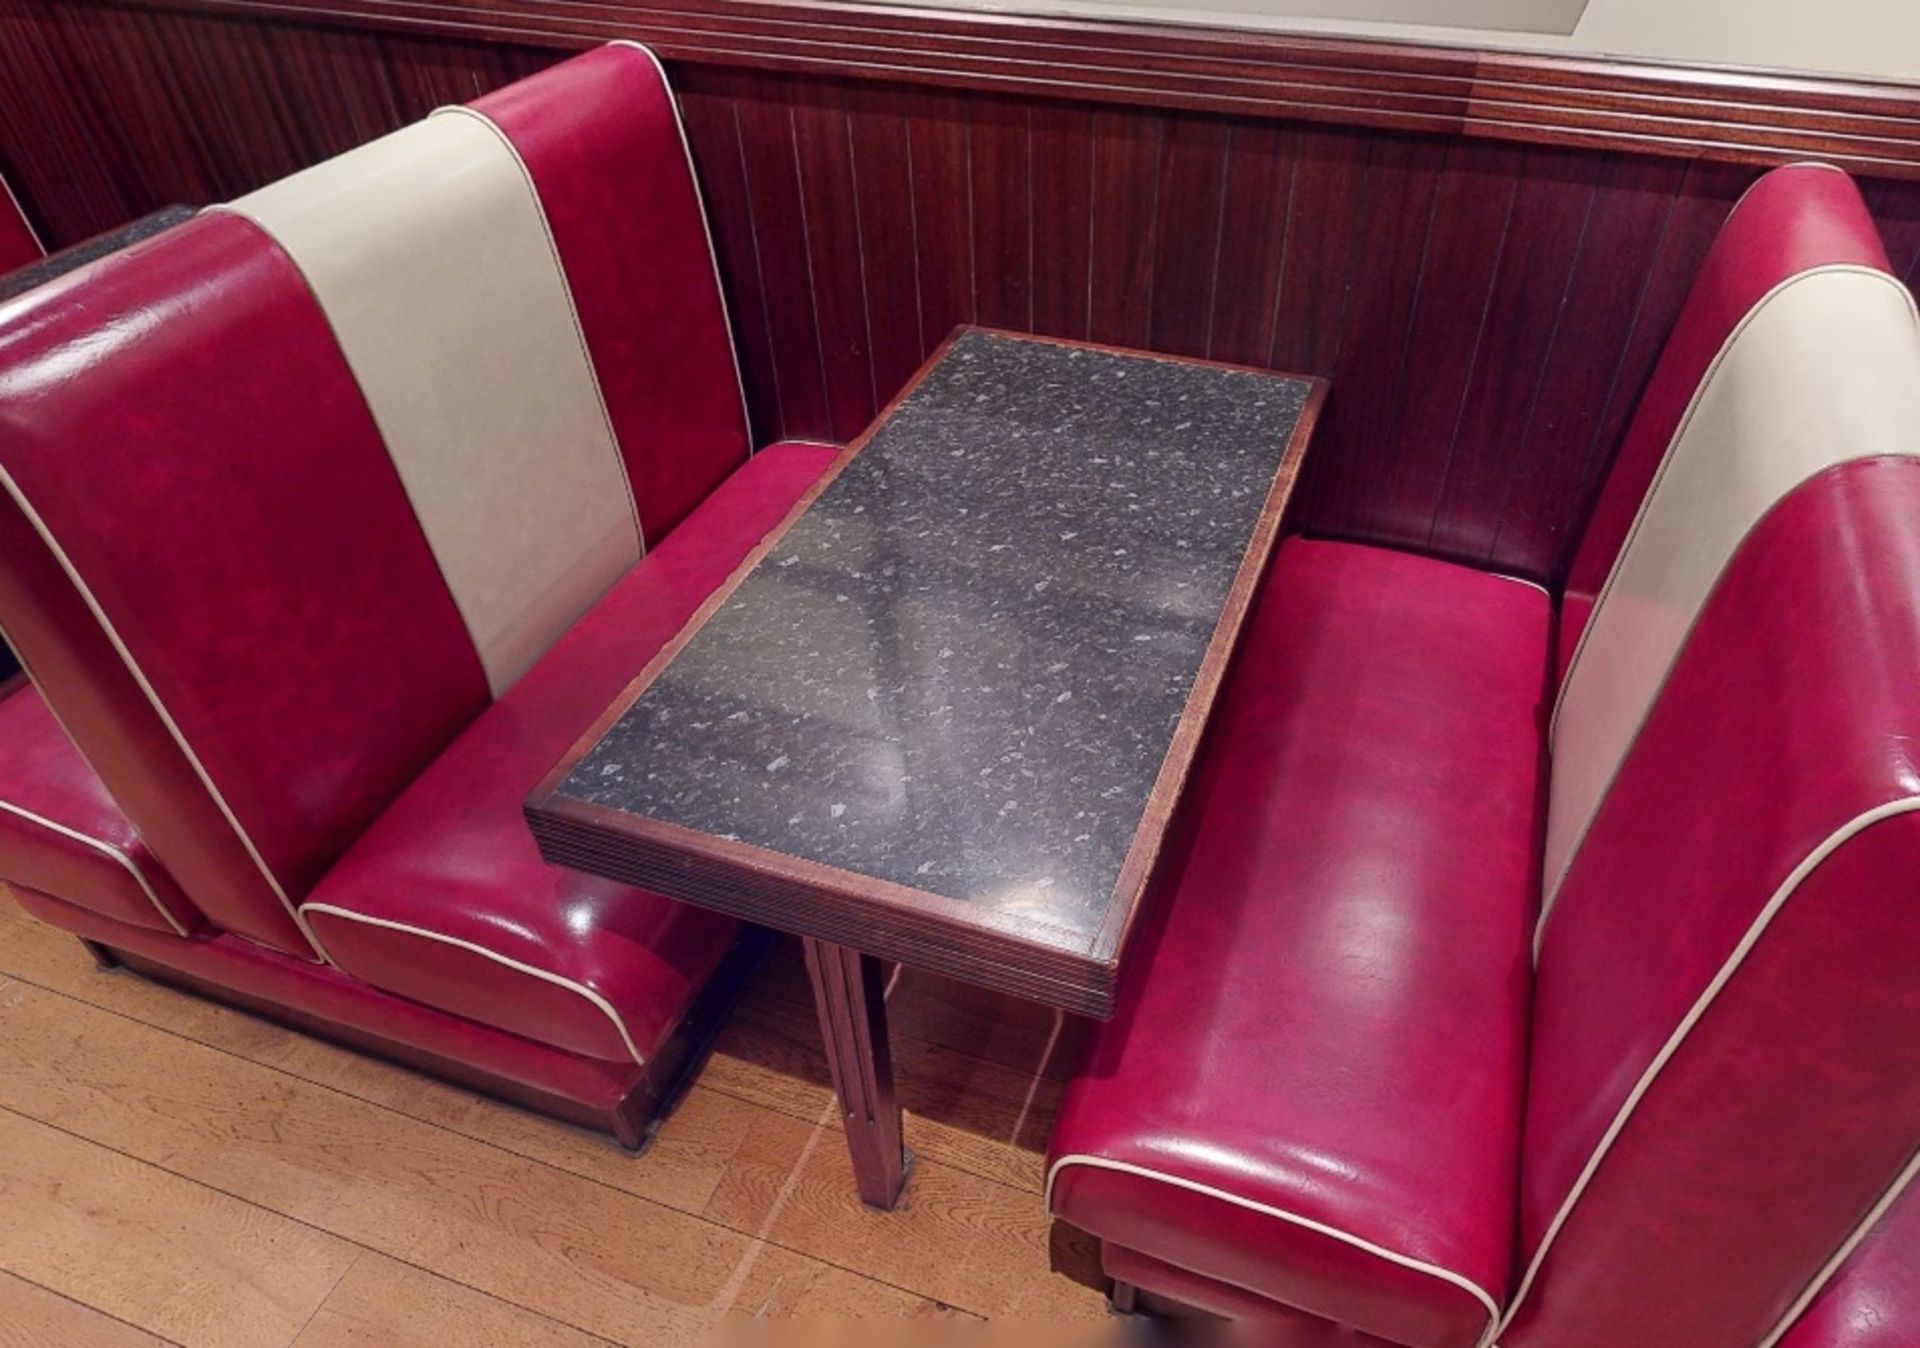 Selection of Double Seating Benches and Dining Tables to Seat Upto 12 Persons - Retro 1950's - Image 2 of 3